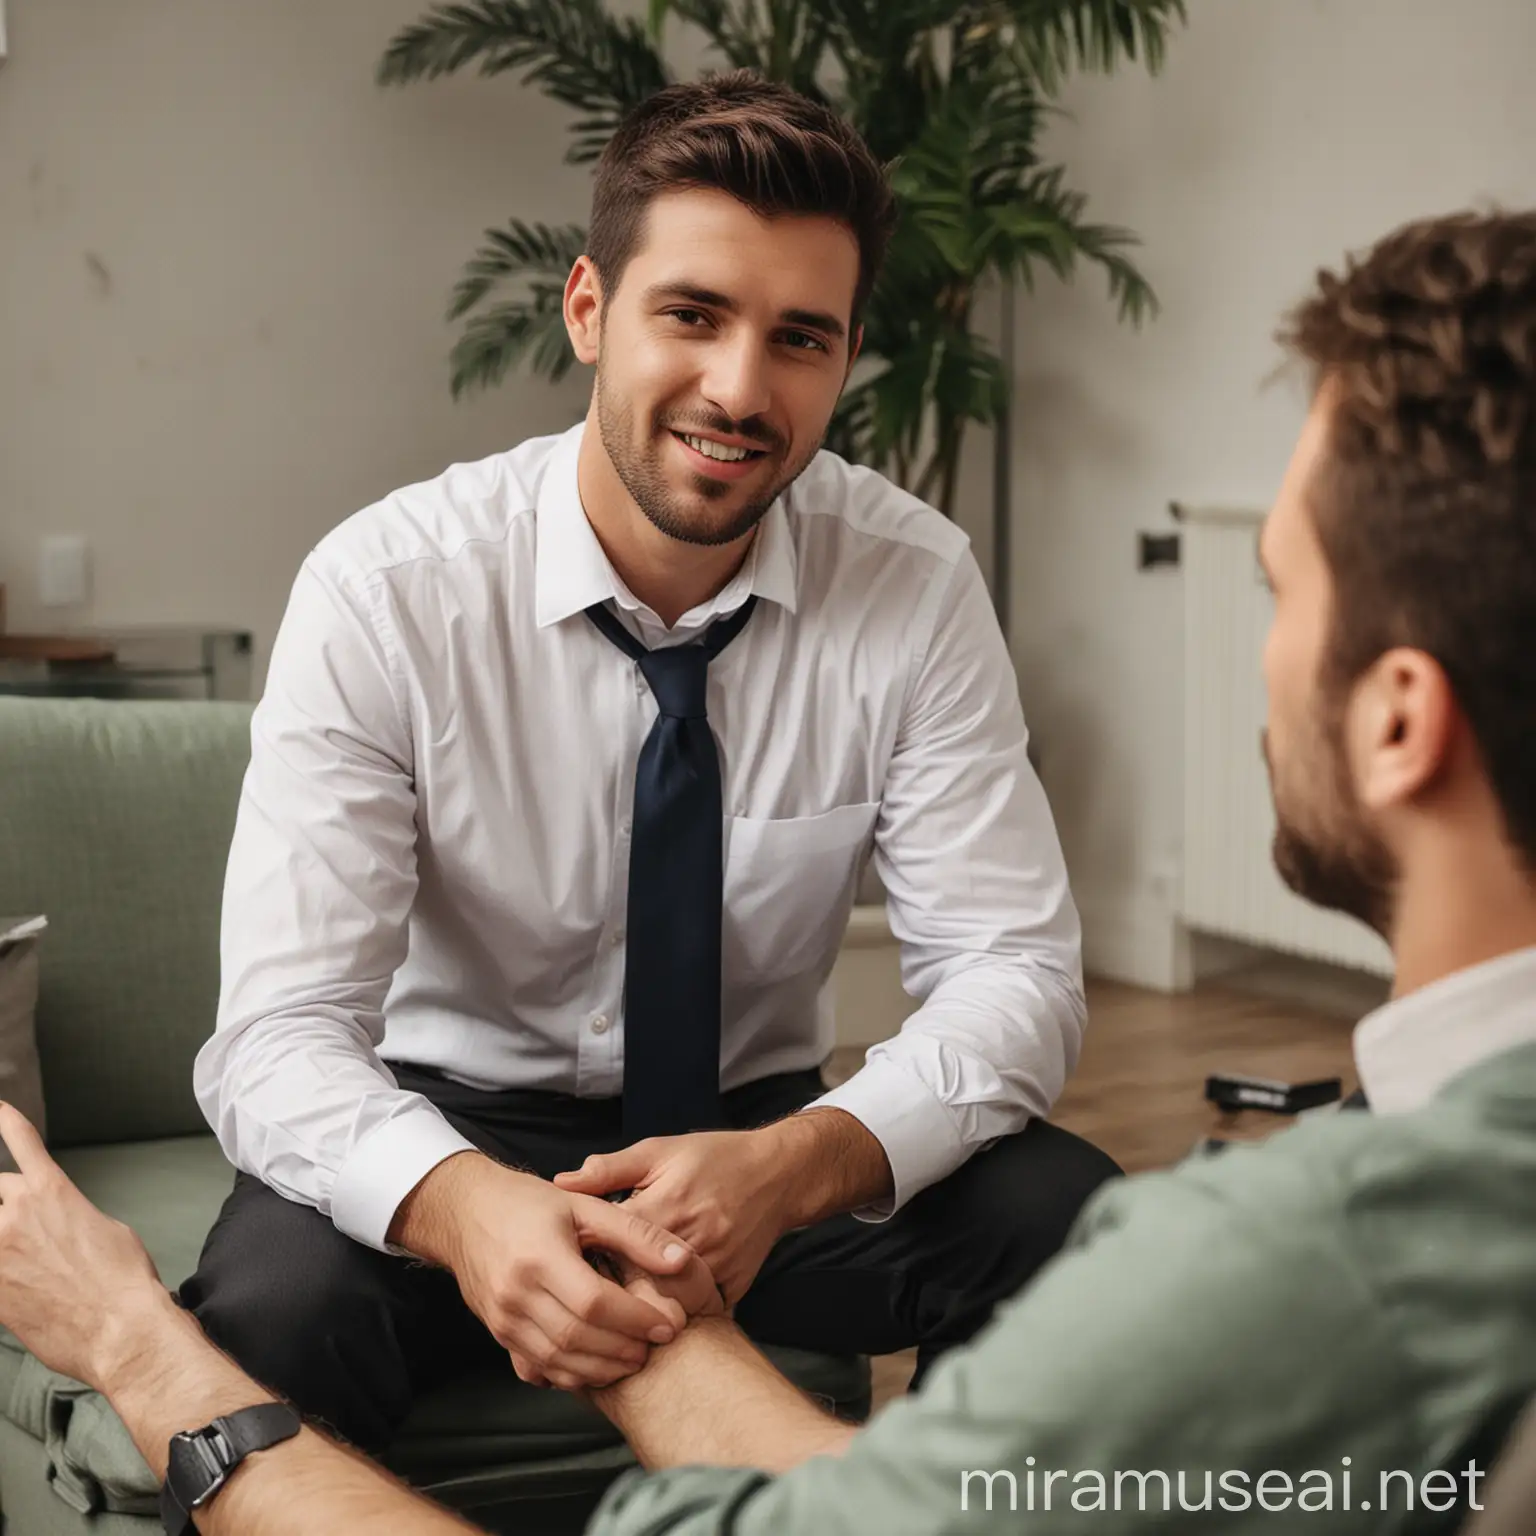 Man Taking Break from Work Therapy Session Discussion